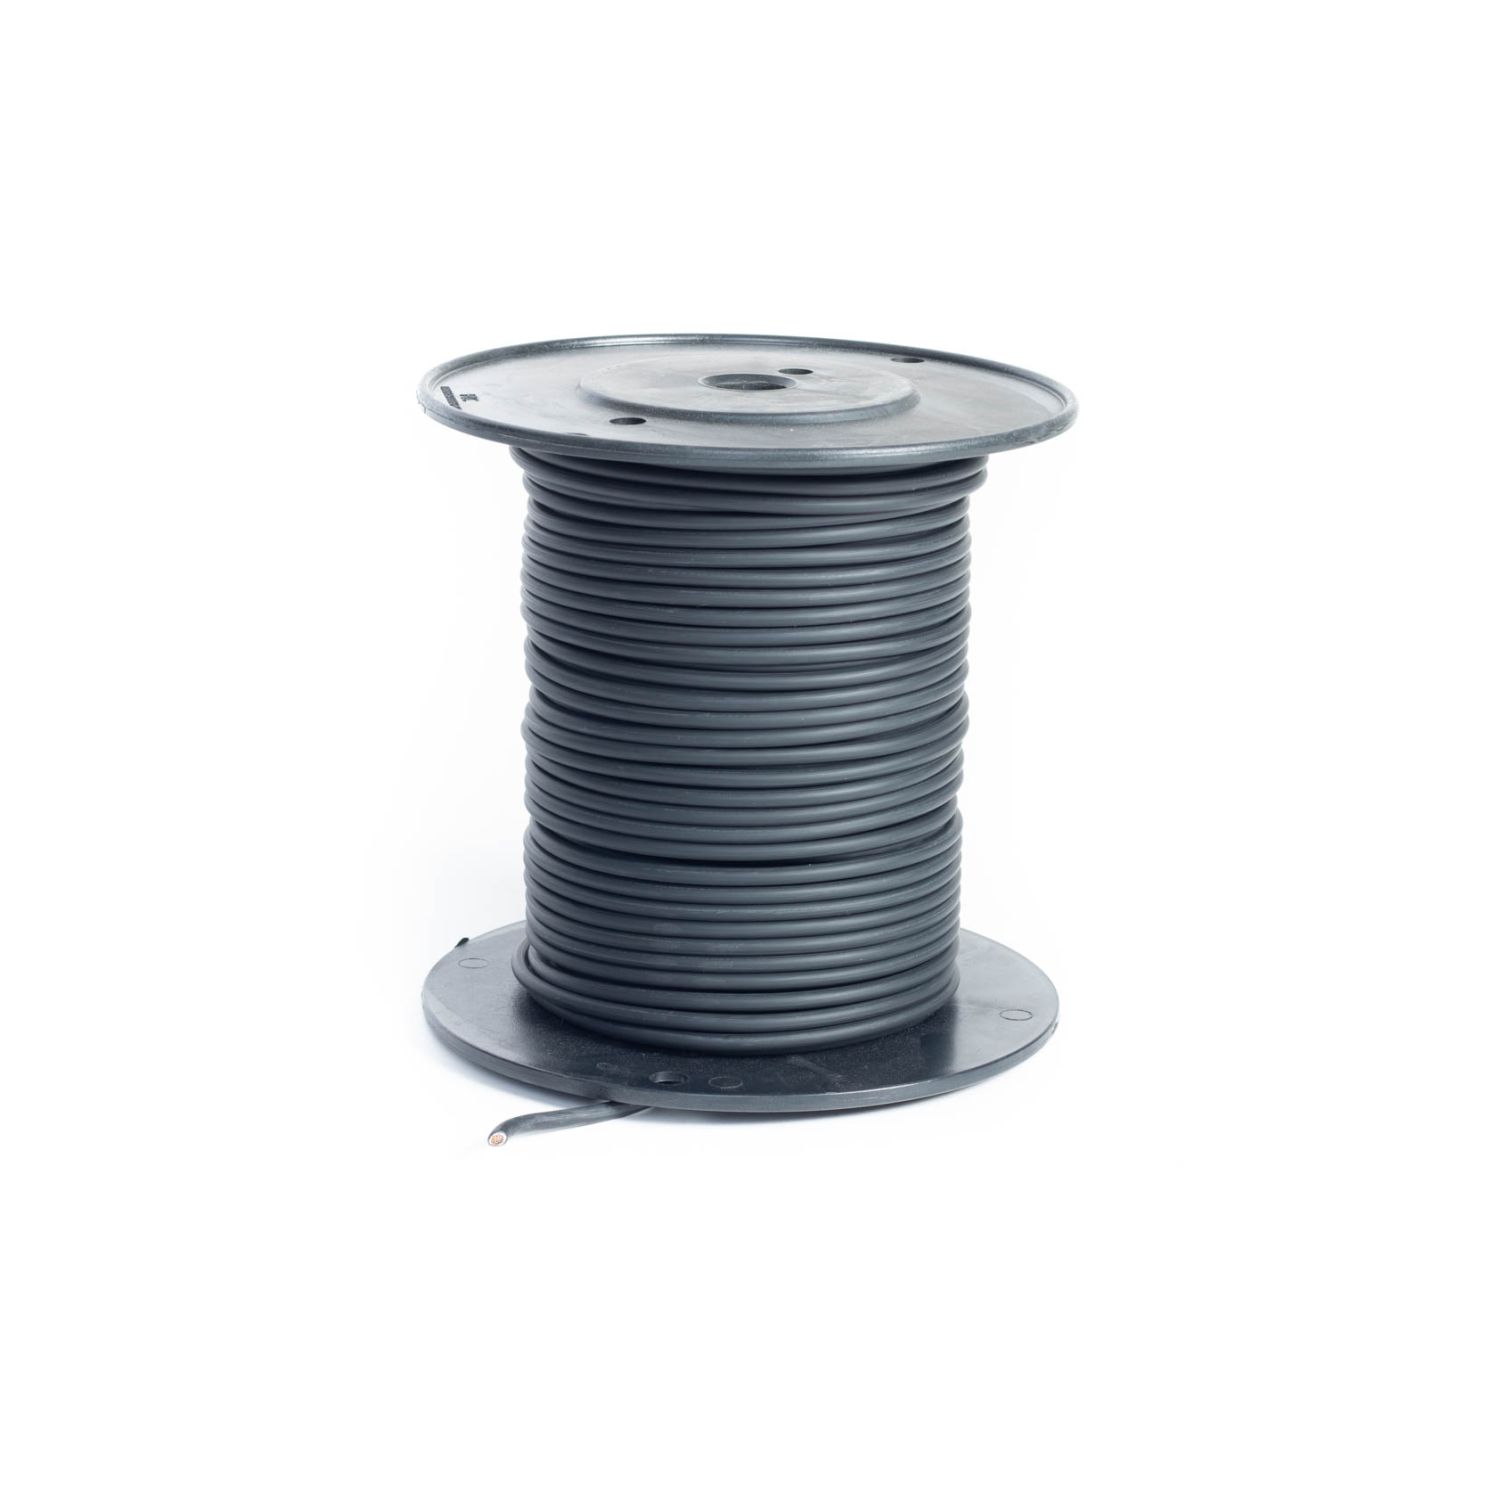 GXL10-0 Primary Black Conductor Wire 12-Gauge